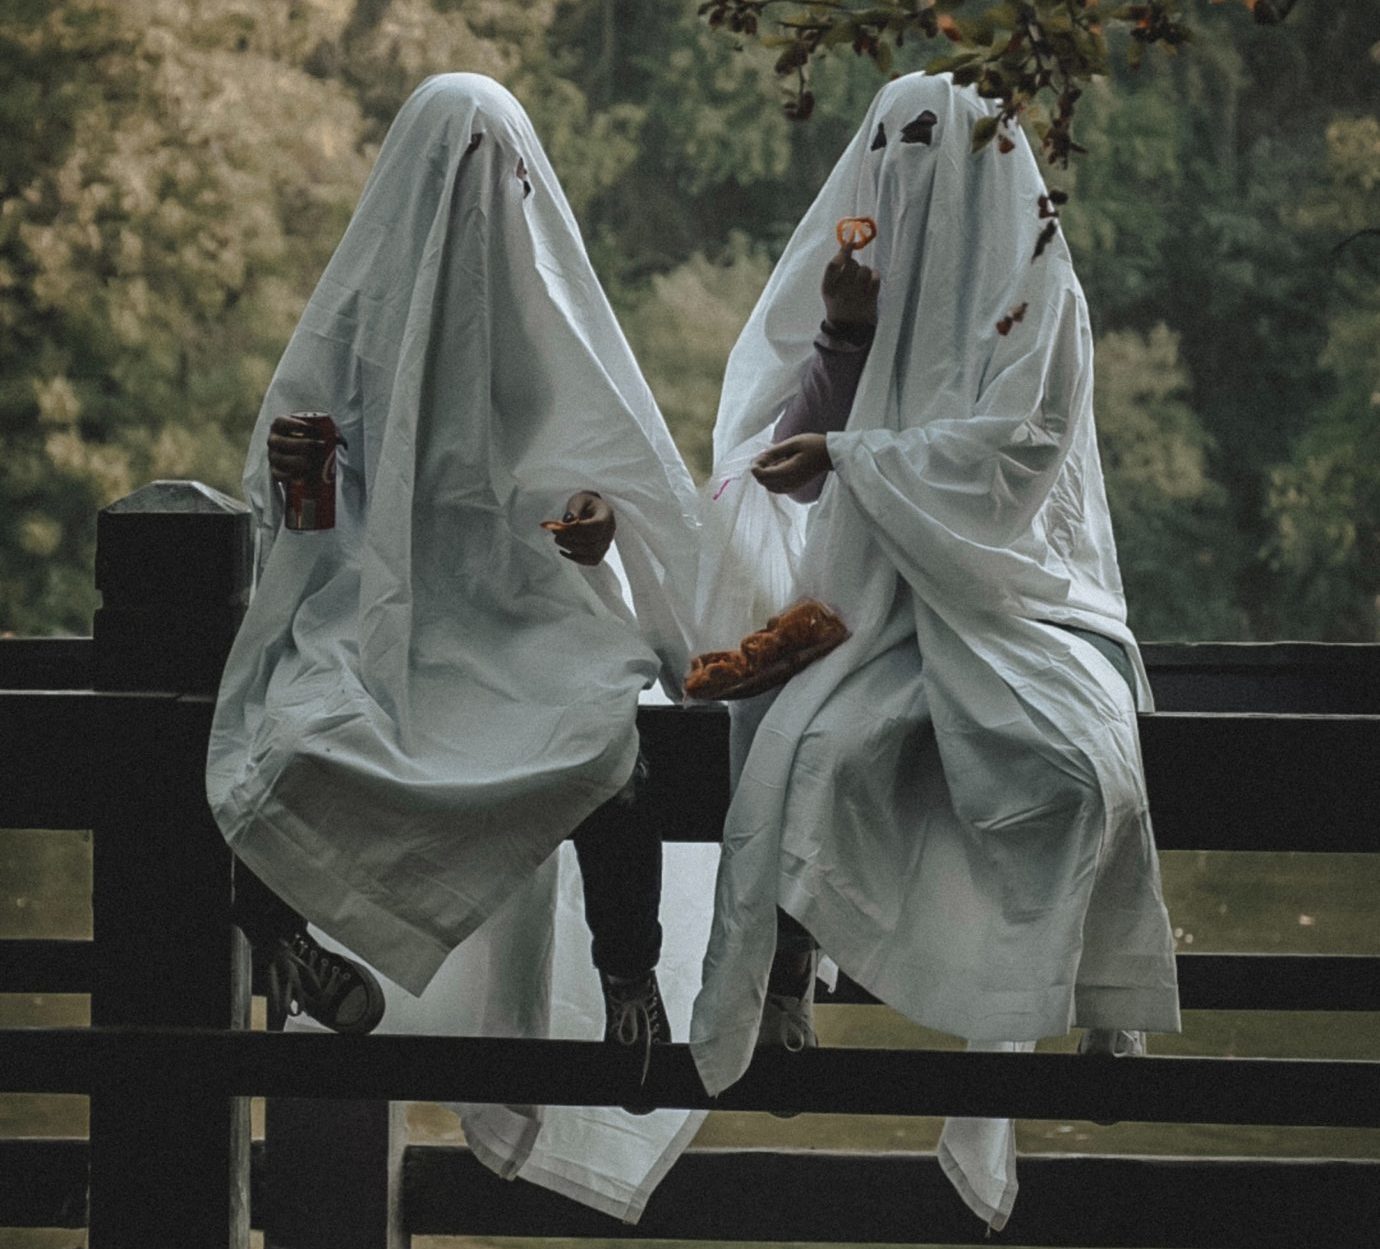 Two kids dressed as ghosts eating snacks from a bag